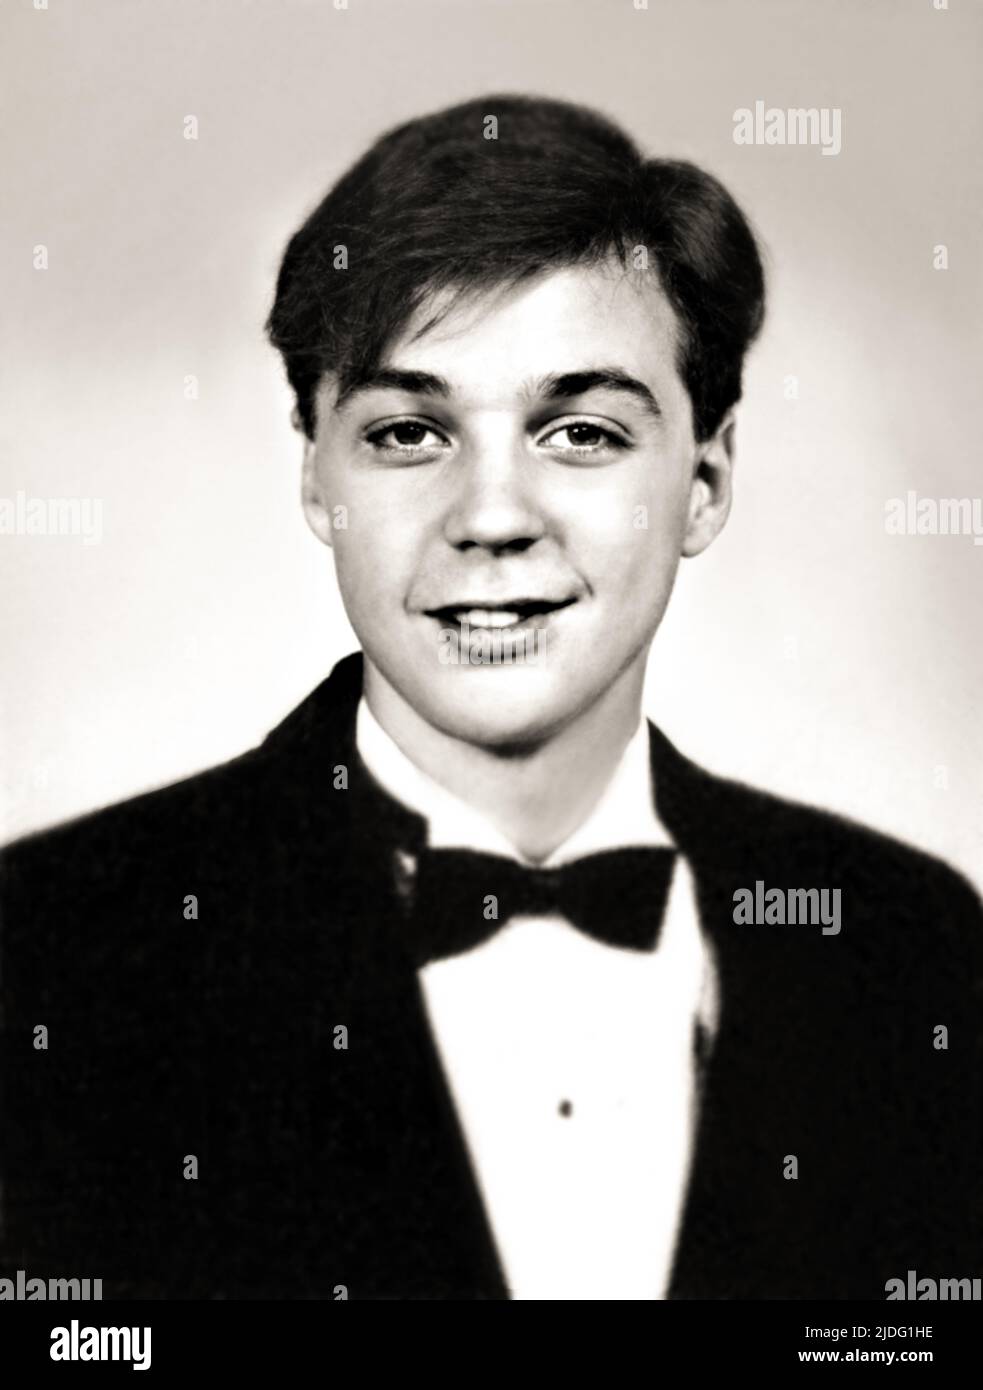 1990 ca, LOS ANGELES , USA : The celebrated  movie and television actor JIM PARSON ( born in Houston , 24 march 1973 ), famous for his role of Sheldon Cooper in TV serial BIG BANG THEORY ( 2007 - 2019 ) when was a boy aged 17 . Photo from the HIGH SCHOOL YEARBOOK , unknown photographer .- HISTORY - FOTO STORICHE - ATTORE - MOVIE - CINEMA - TELEVISIONE - personalità  da giovane - personality personalities when was young - TEENAGER - smile - sorriso - LGBTQ - GAY - BROADCAST  - ADOLESCENZA - ADOLESCENTE --- ARCHIVIO GBB Stock Photo